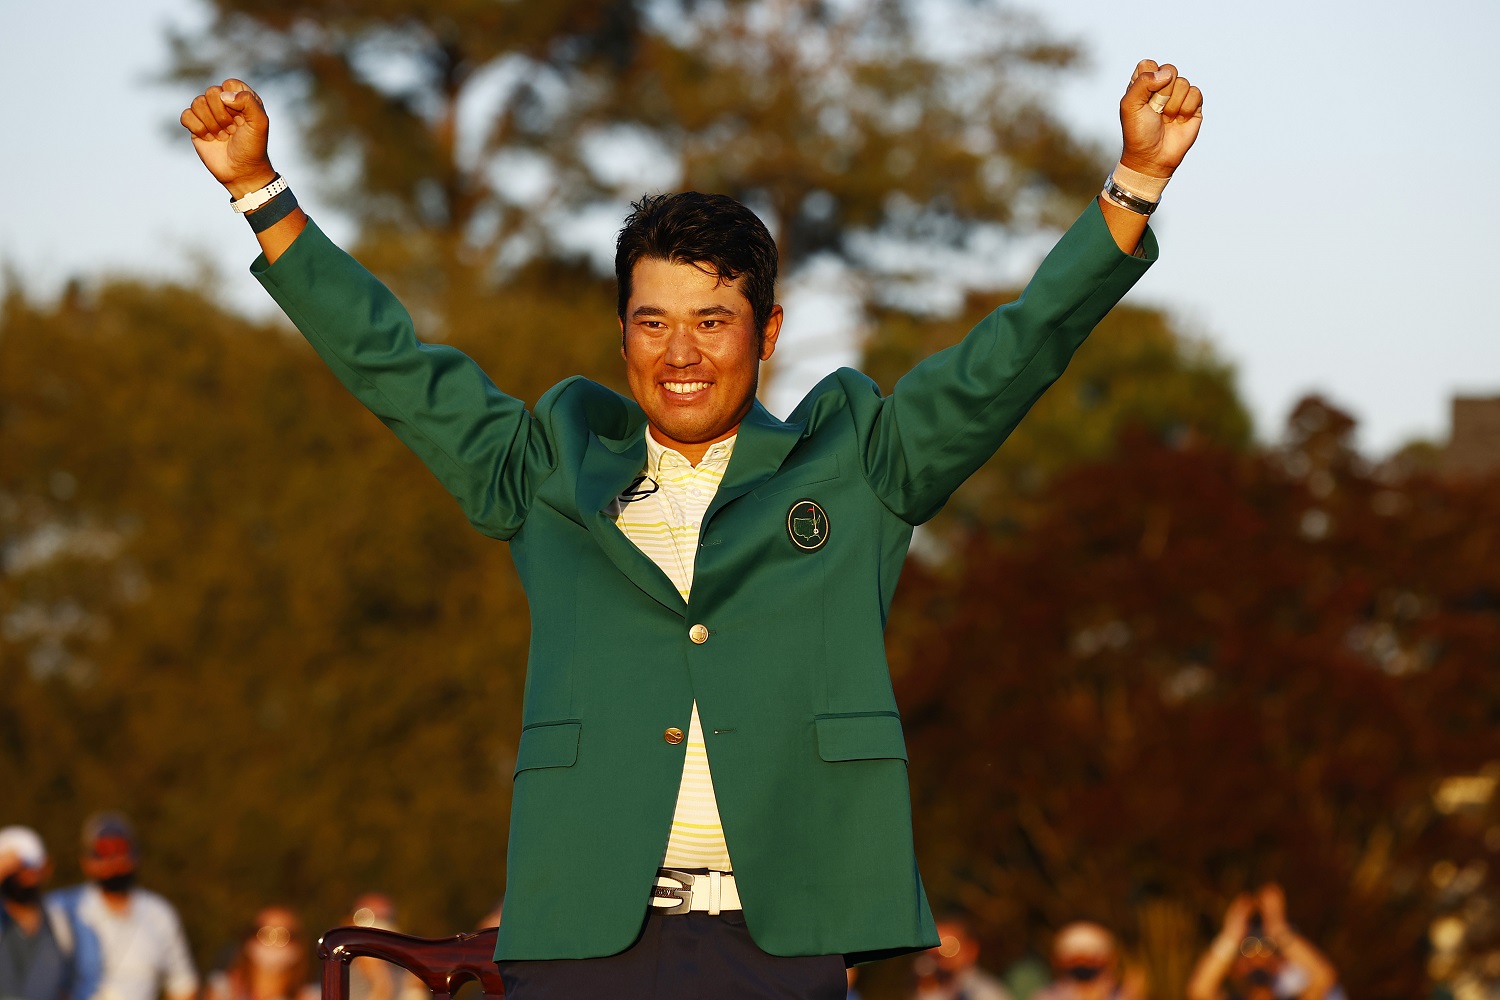 Hideki Matsuyama celebrates during the Green Jacket ceremony after winning The Masters at Augusta National Golf Club. | Jared C. Tilton/Getty Images